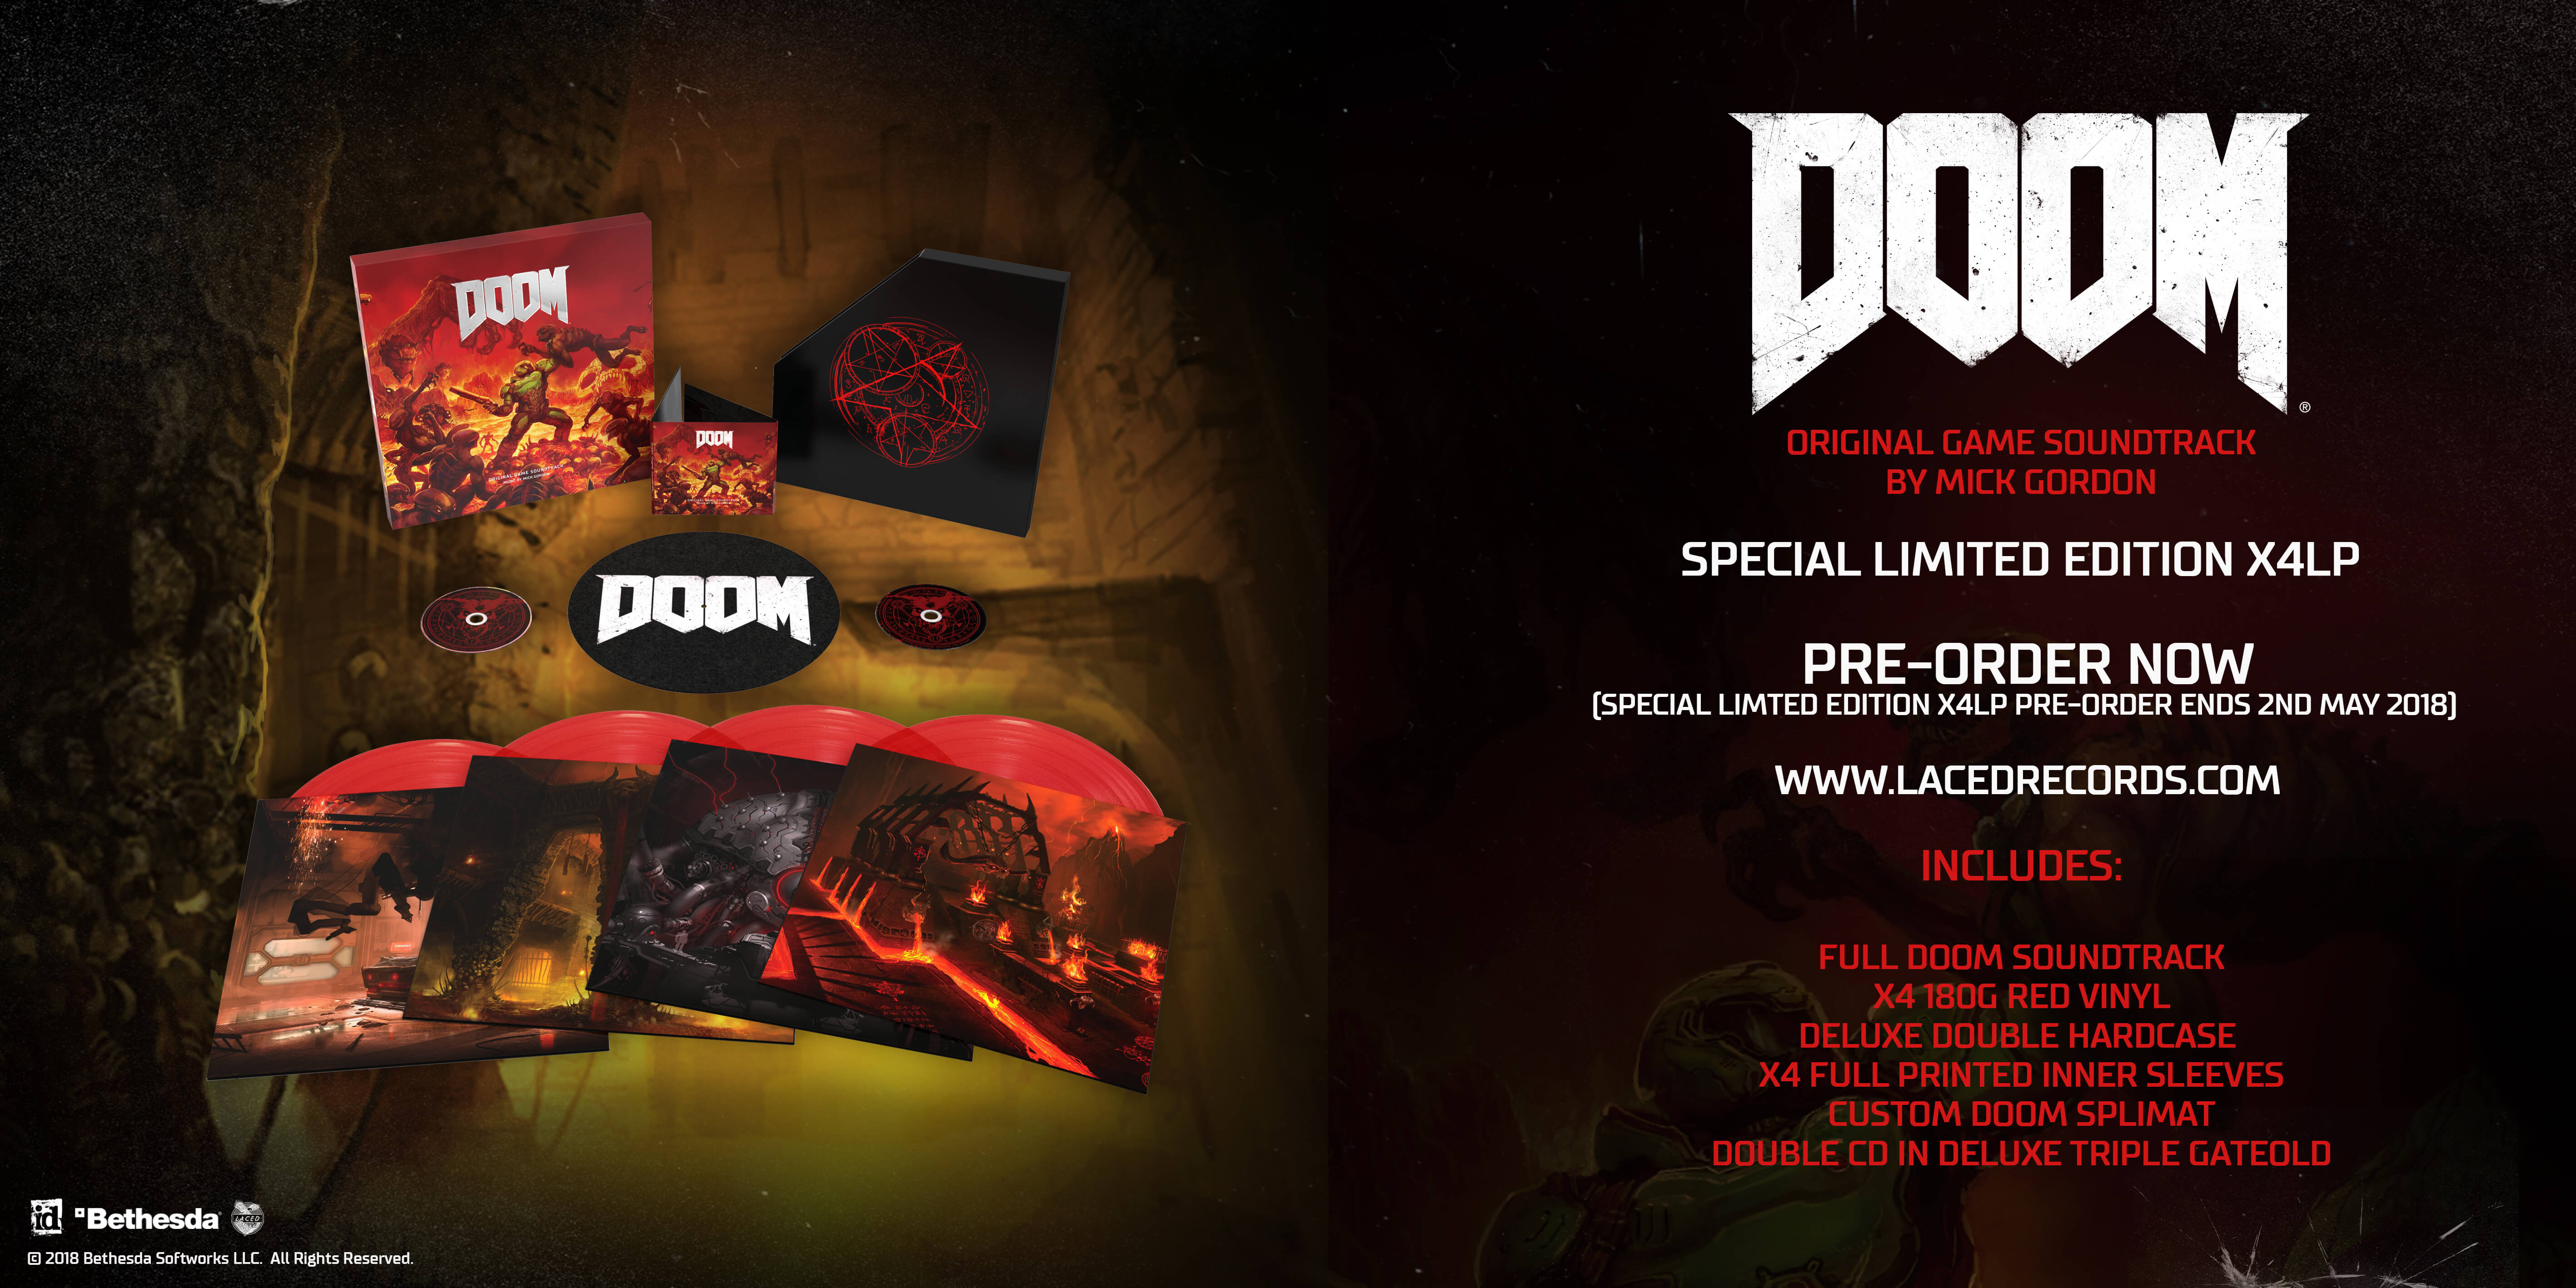 Deqenereret Kondensere pessimist DOOM® (Original Game Soundtrack) rips and tears its way onto Vinyl and CD  in Summer 2018 👾 COSMOCOVER - The best PR agency for video games in Europe!